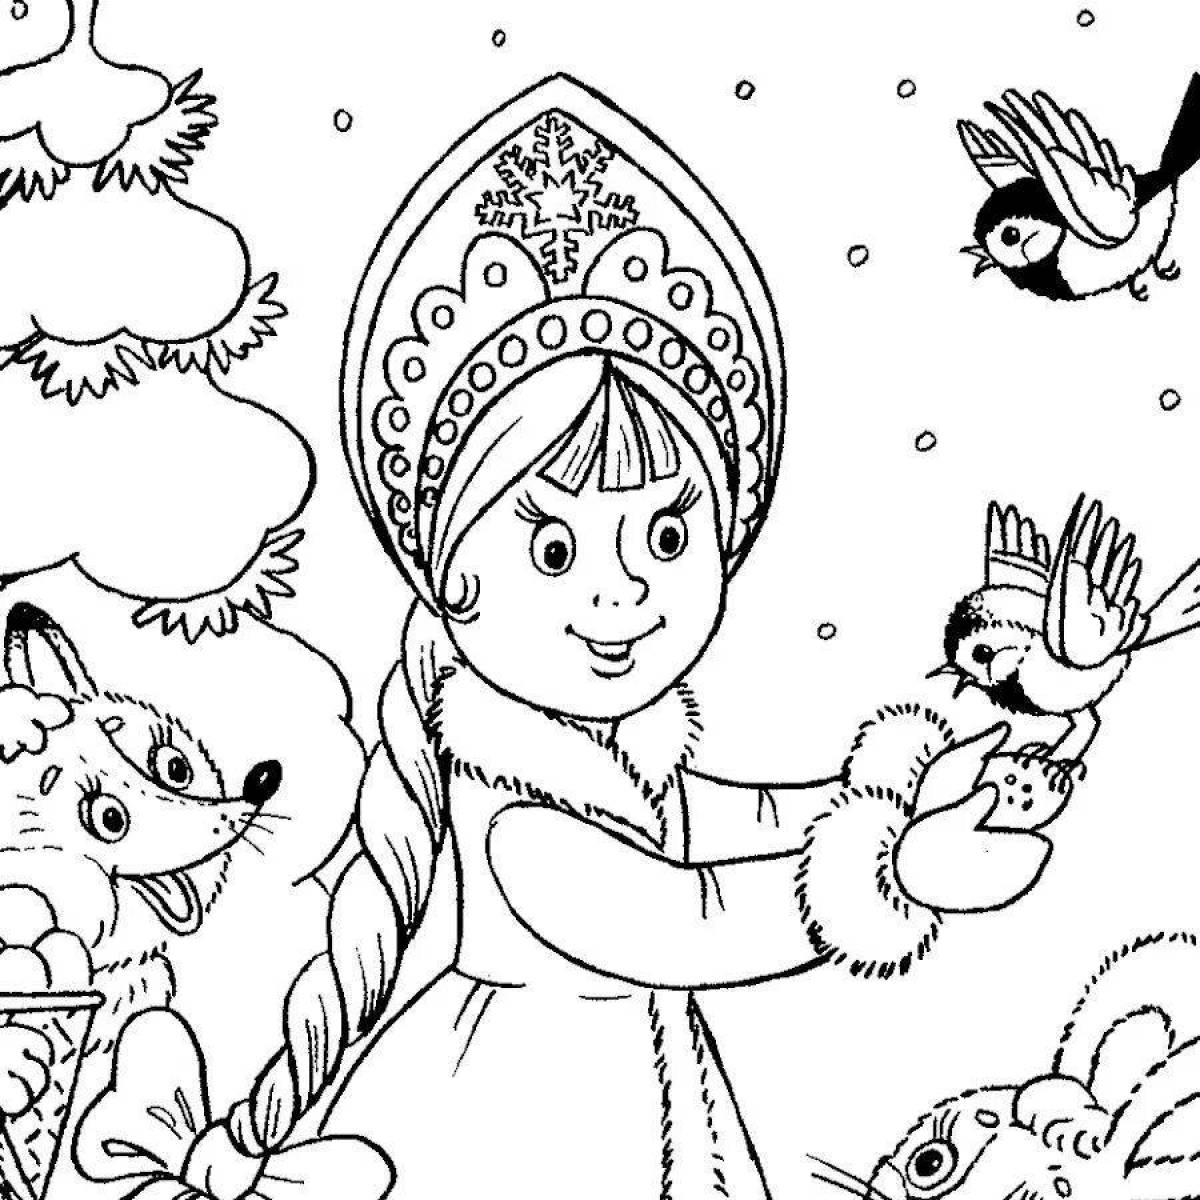 Coloring chic Snow Maiden and Lel